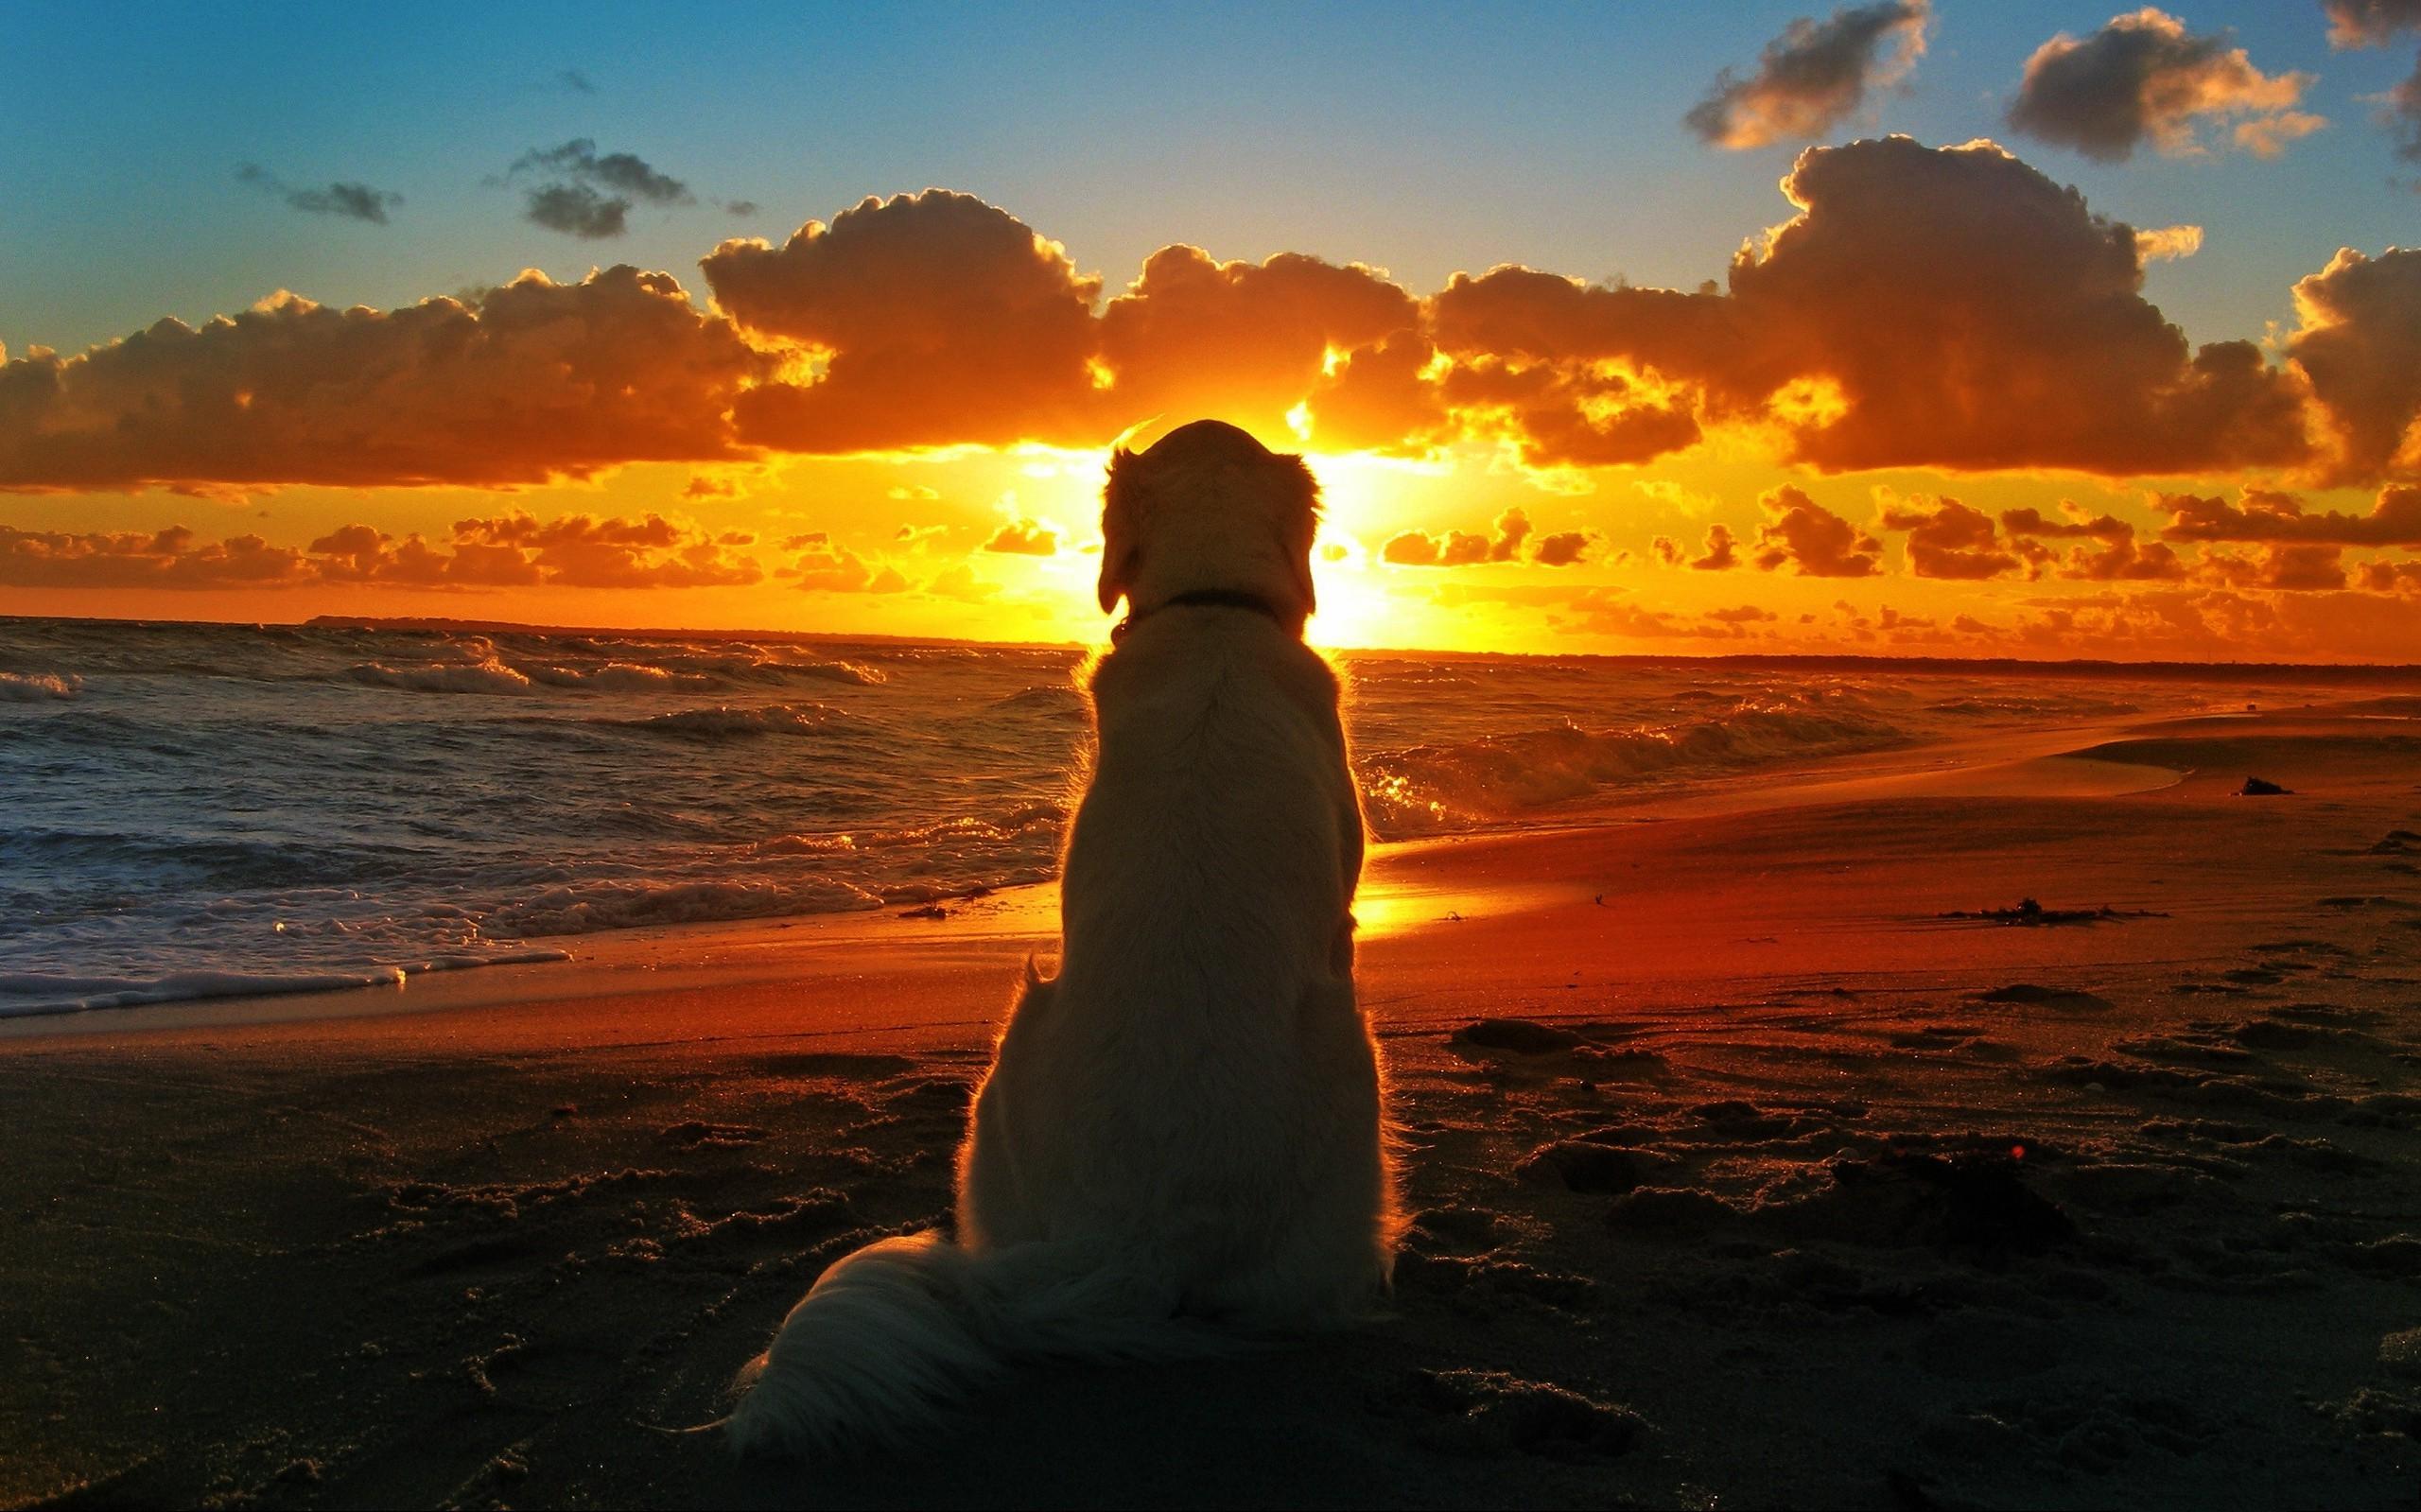 Dog Sunset Beach Waves Clouds Depth Of Field Rare Gallery